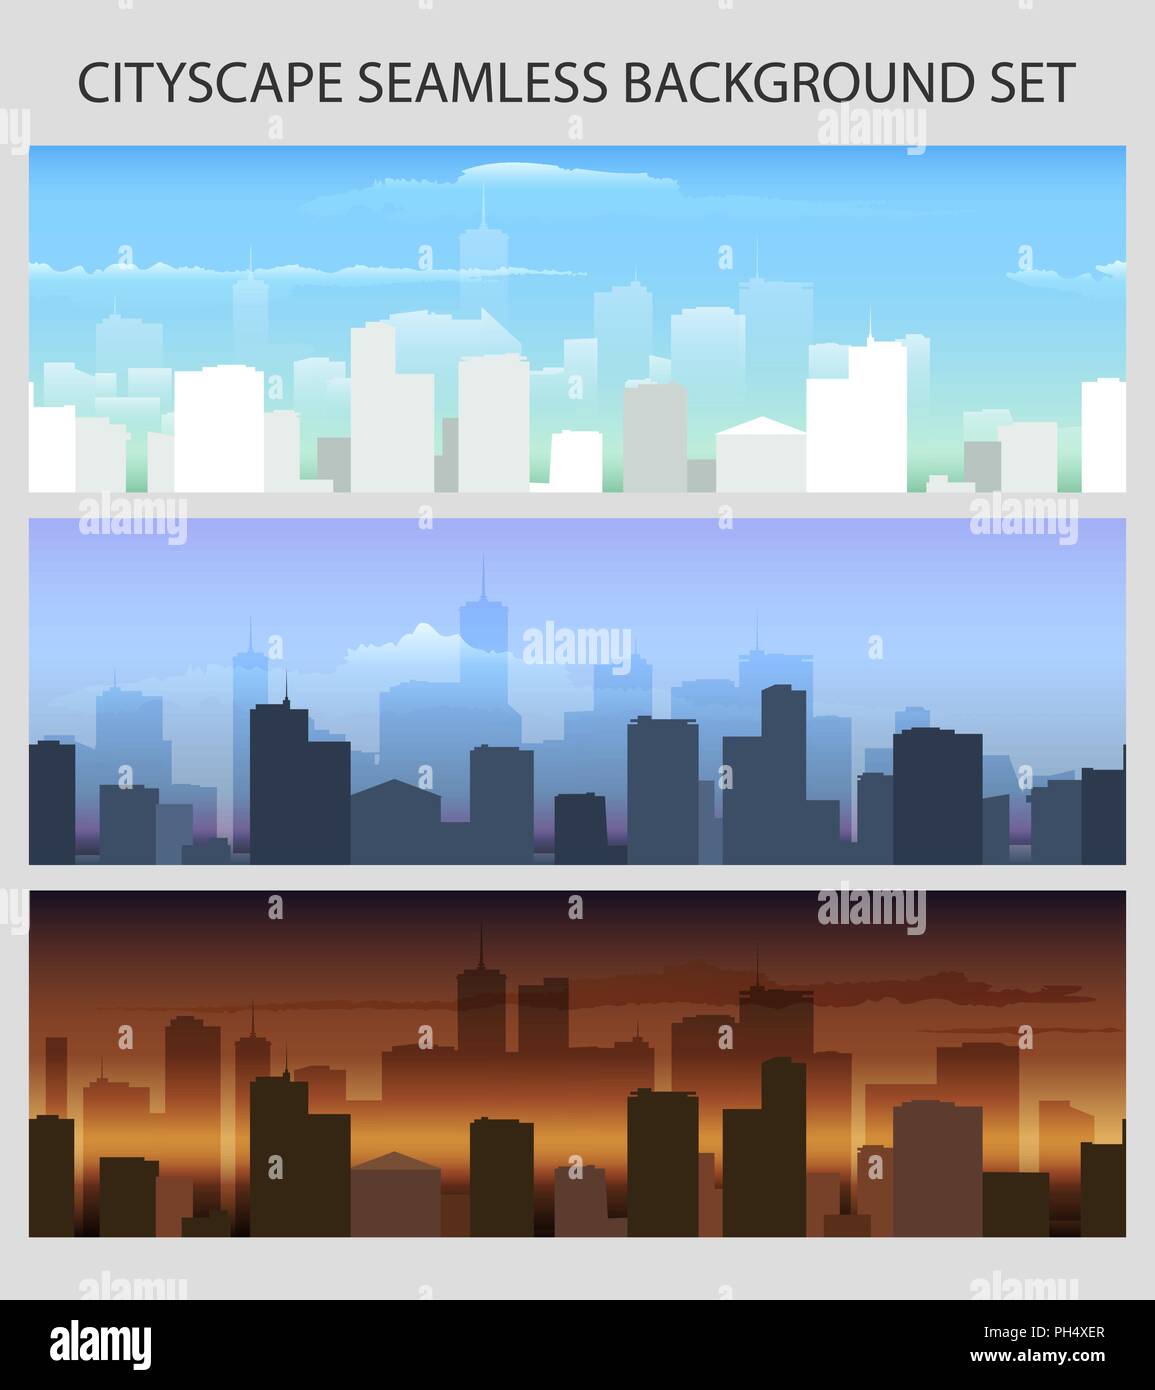 Sunrise, dawn and day cityscape seamless horizontal backround set. Vector illustration Stock Vector